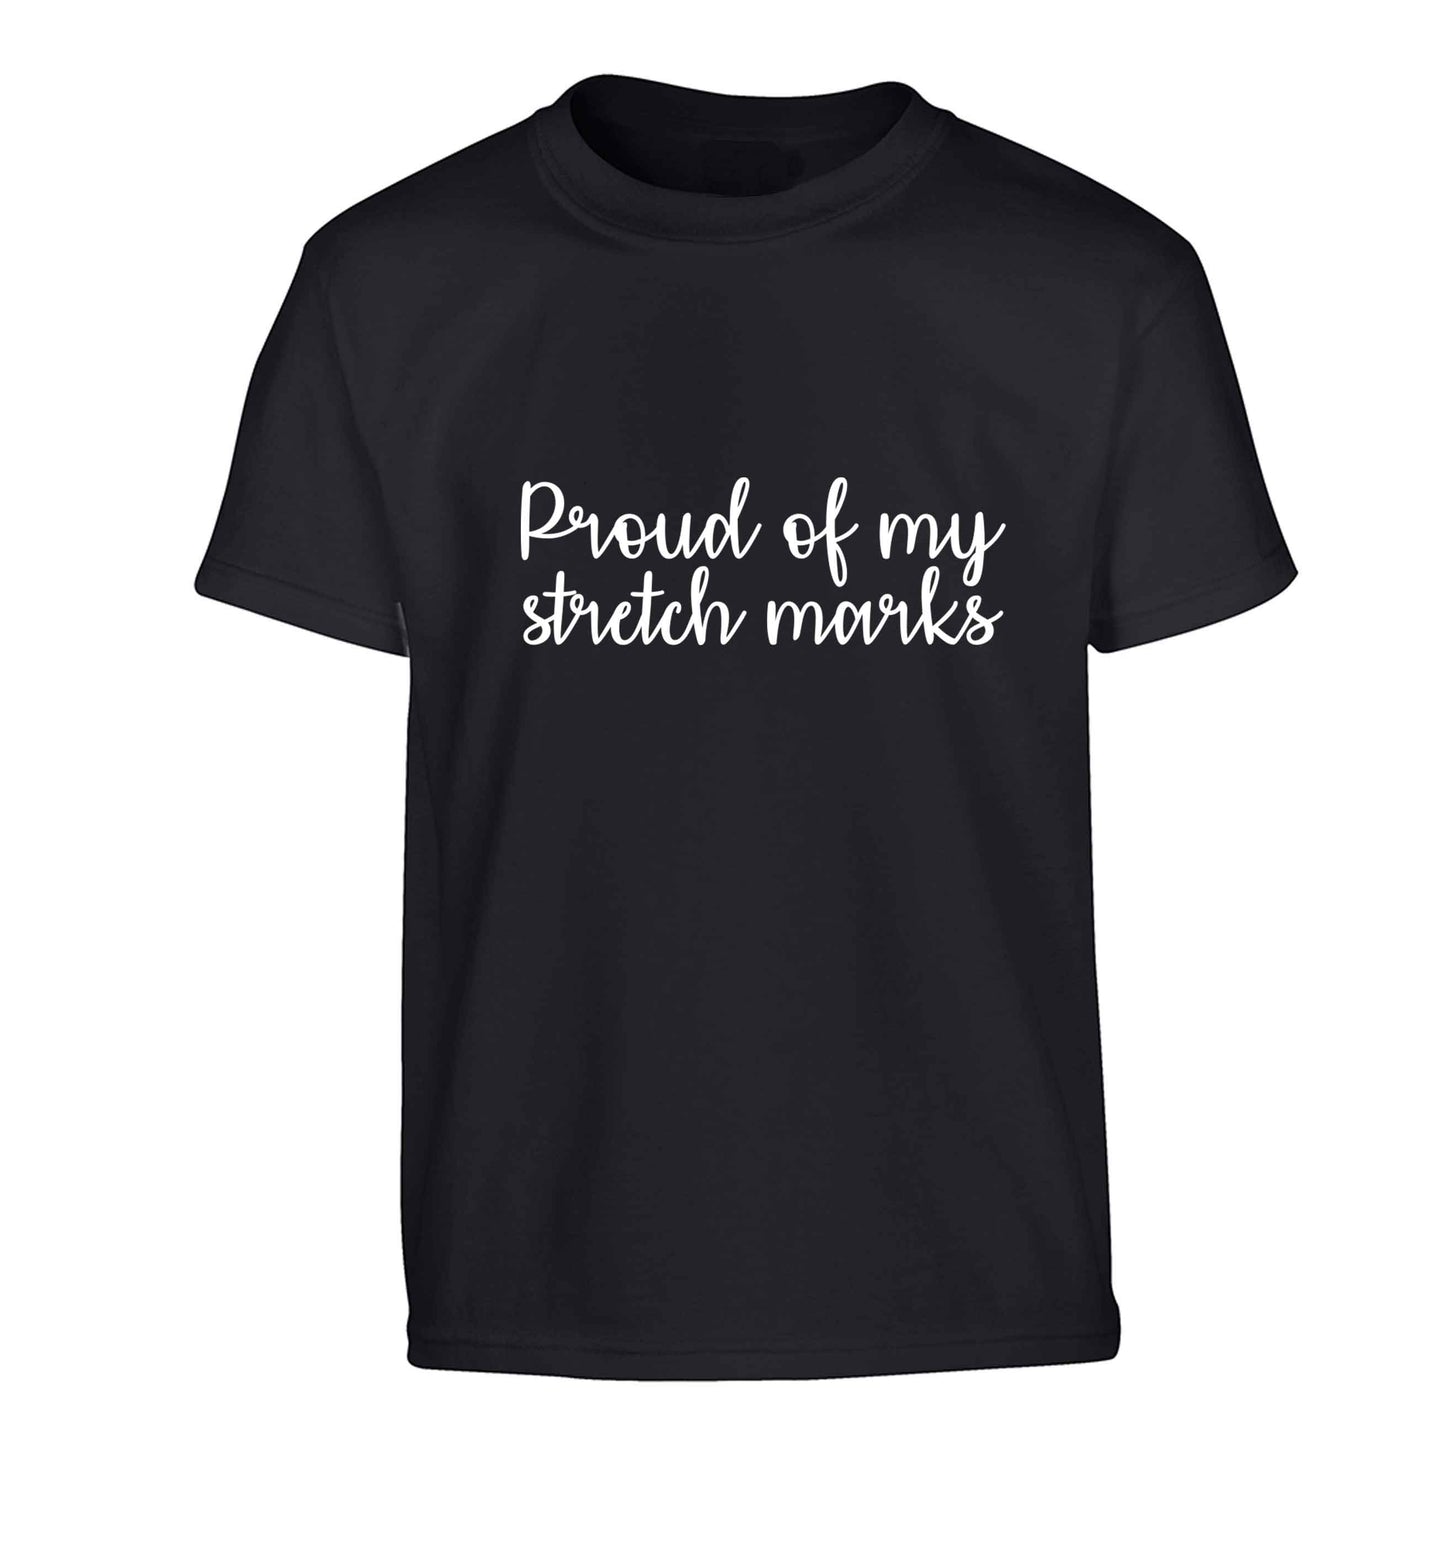 Proud of my stretch marks Children's black Tshirt 12-13 Years